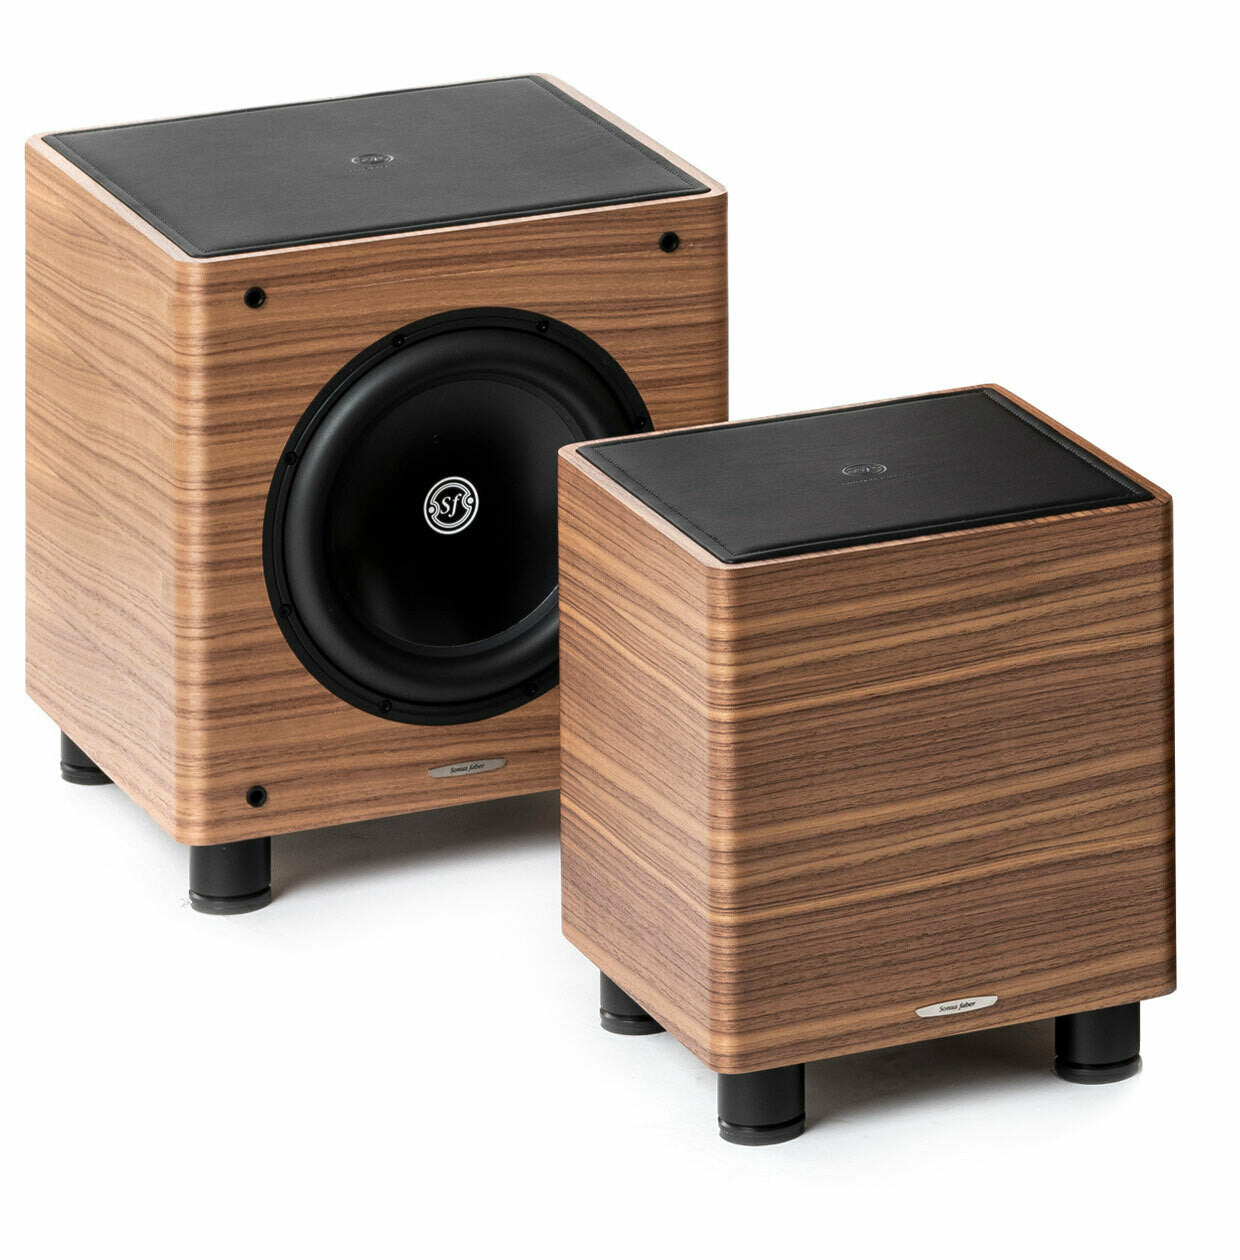 Sonus Faber Gravis I/II Subwoofer (Please call/In-Store Only) - Audio Excellence - {{{{ product.product_type }} - Sonus Faber